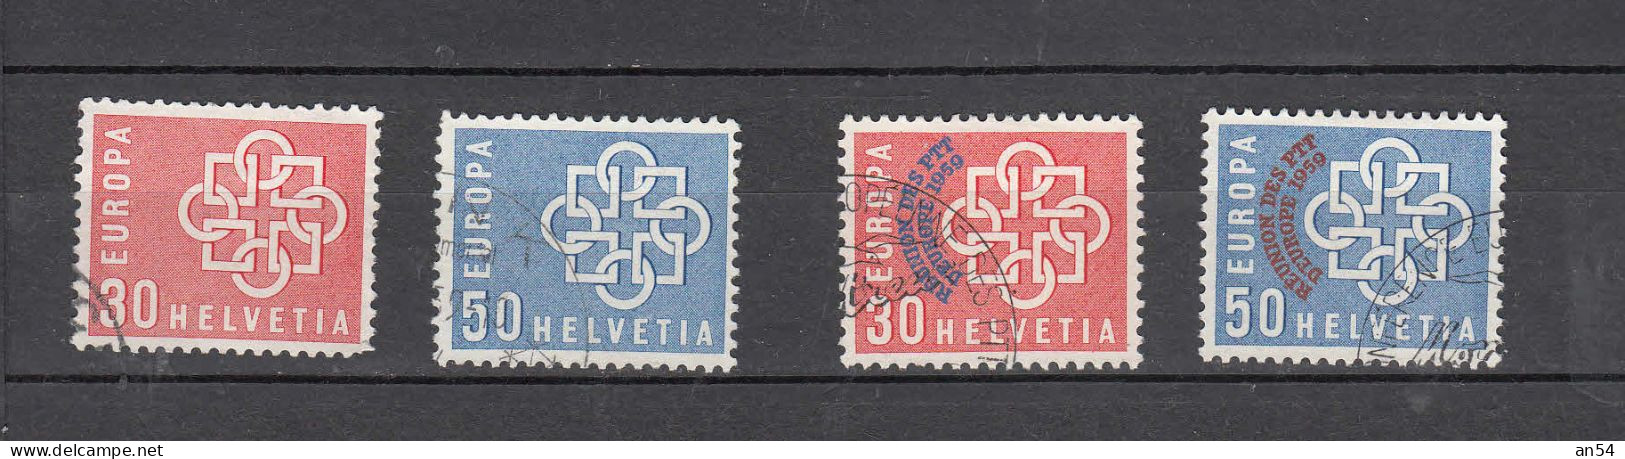 1959  N° 347 à 350    OBLITERES        CATALOGUE SBK - Used Stamps